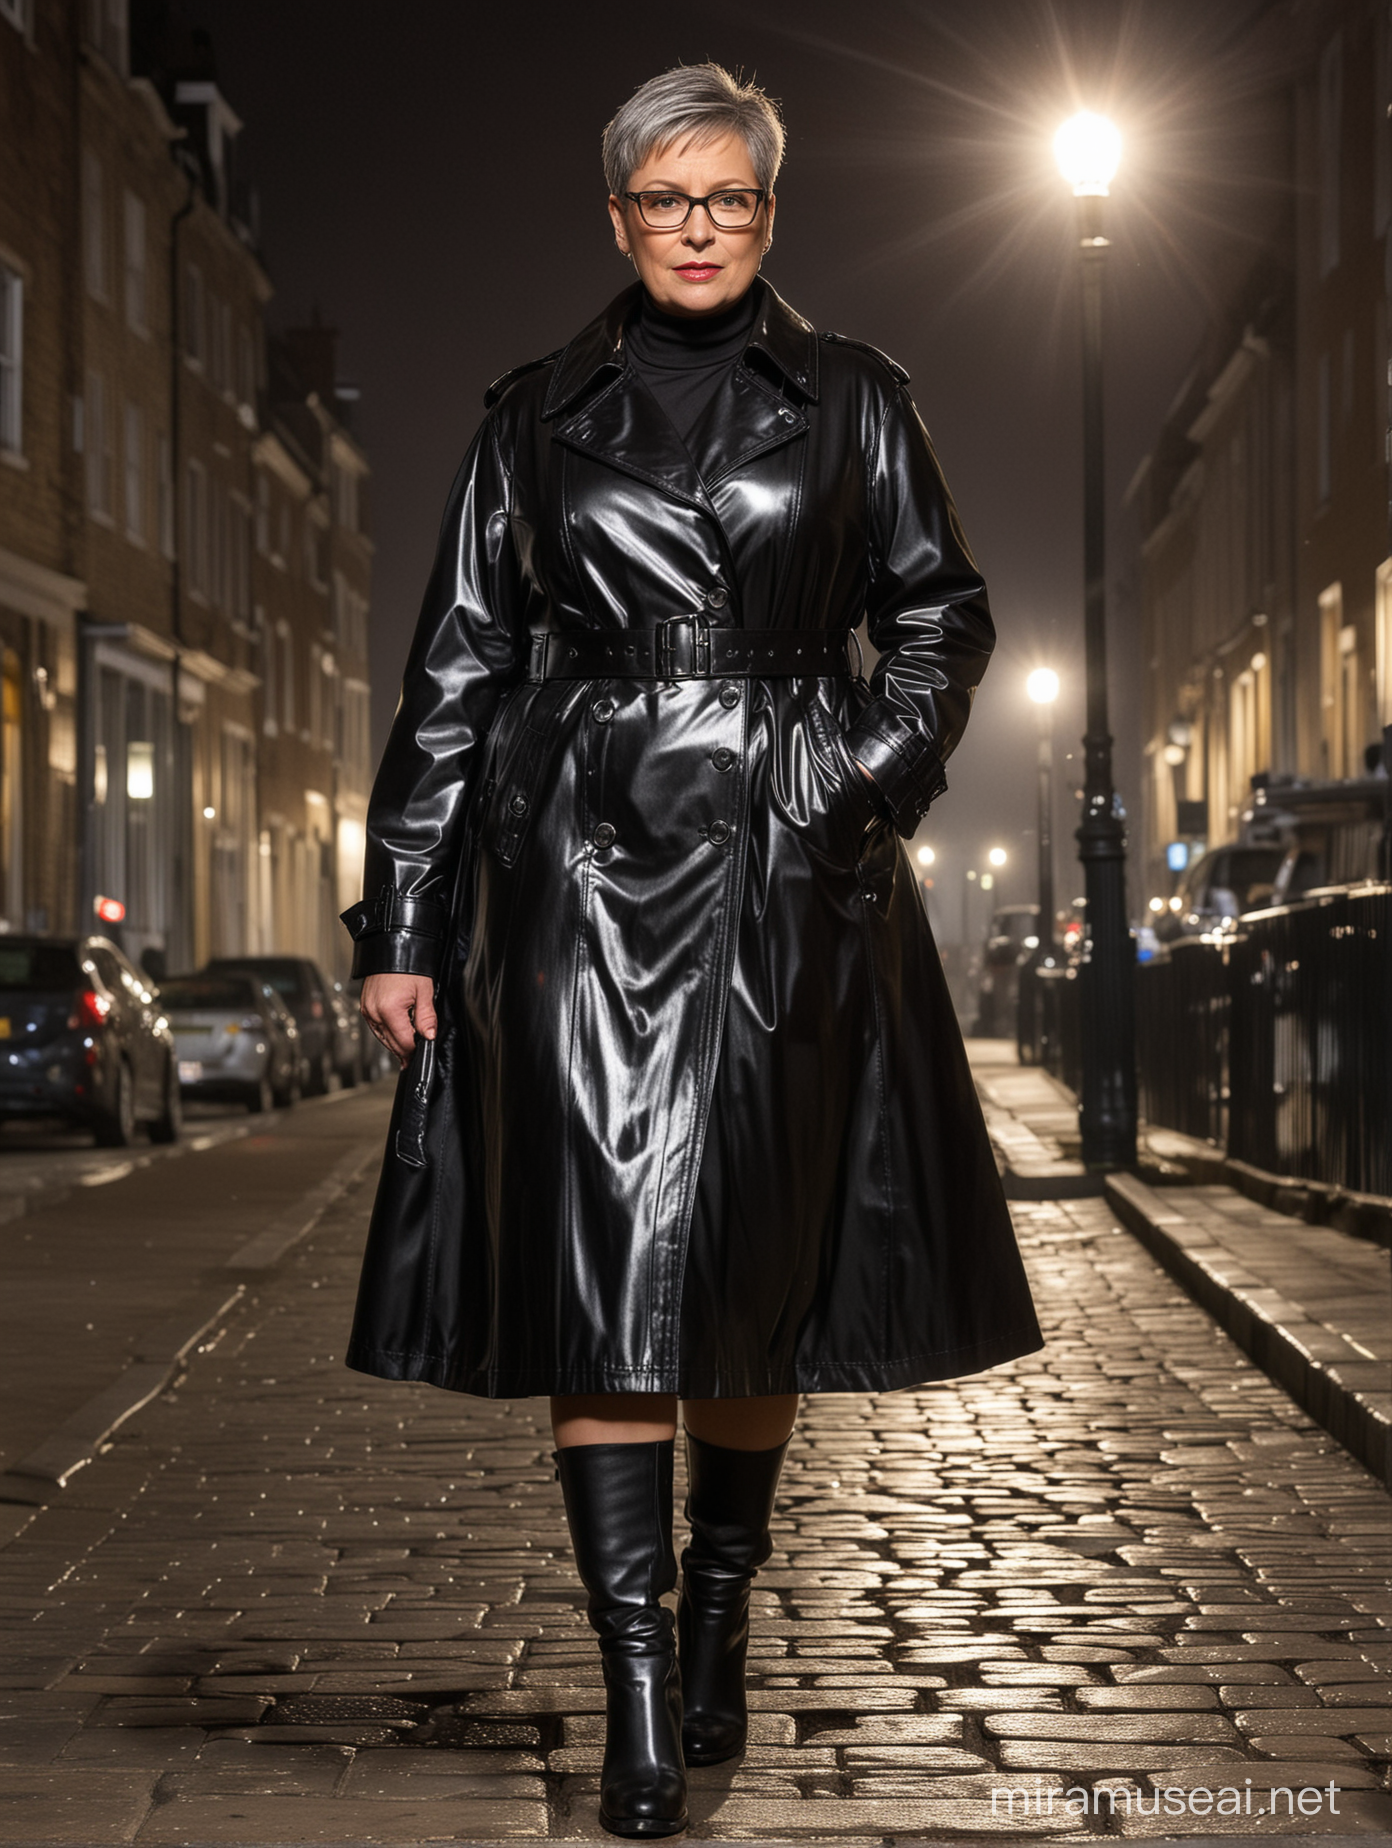 Confident Mature Woman in Shiny Black PVC Trench Coat Walking at Night